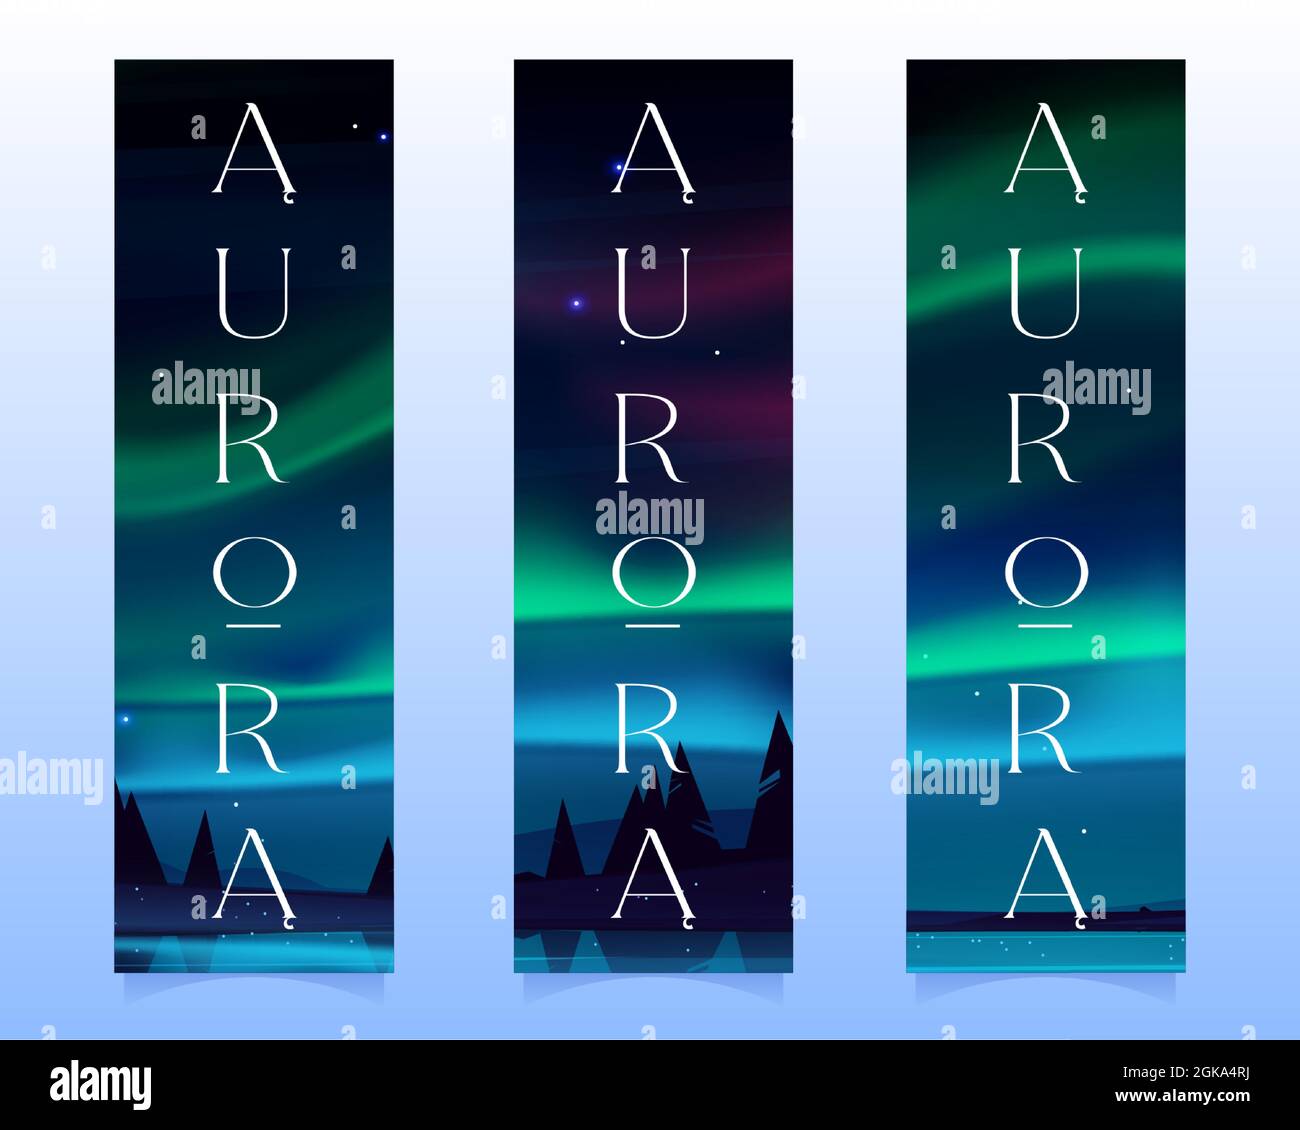 Aurora borealis, northern lights in arctic night sky with stars on bookmarks. Vector vertical banners with cartoon winter landscape with lake, silhouettes of trees and polar lights Stock Vector